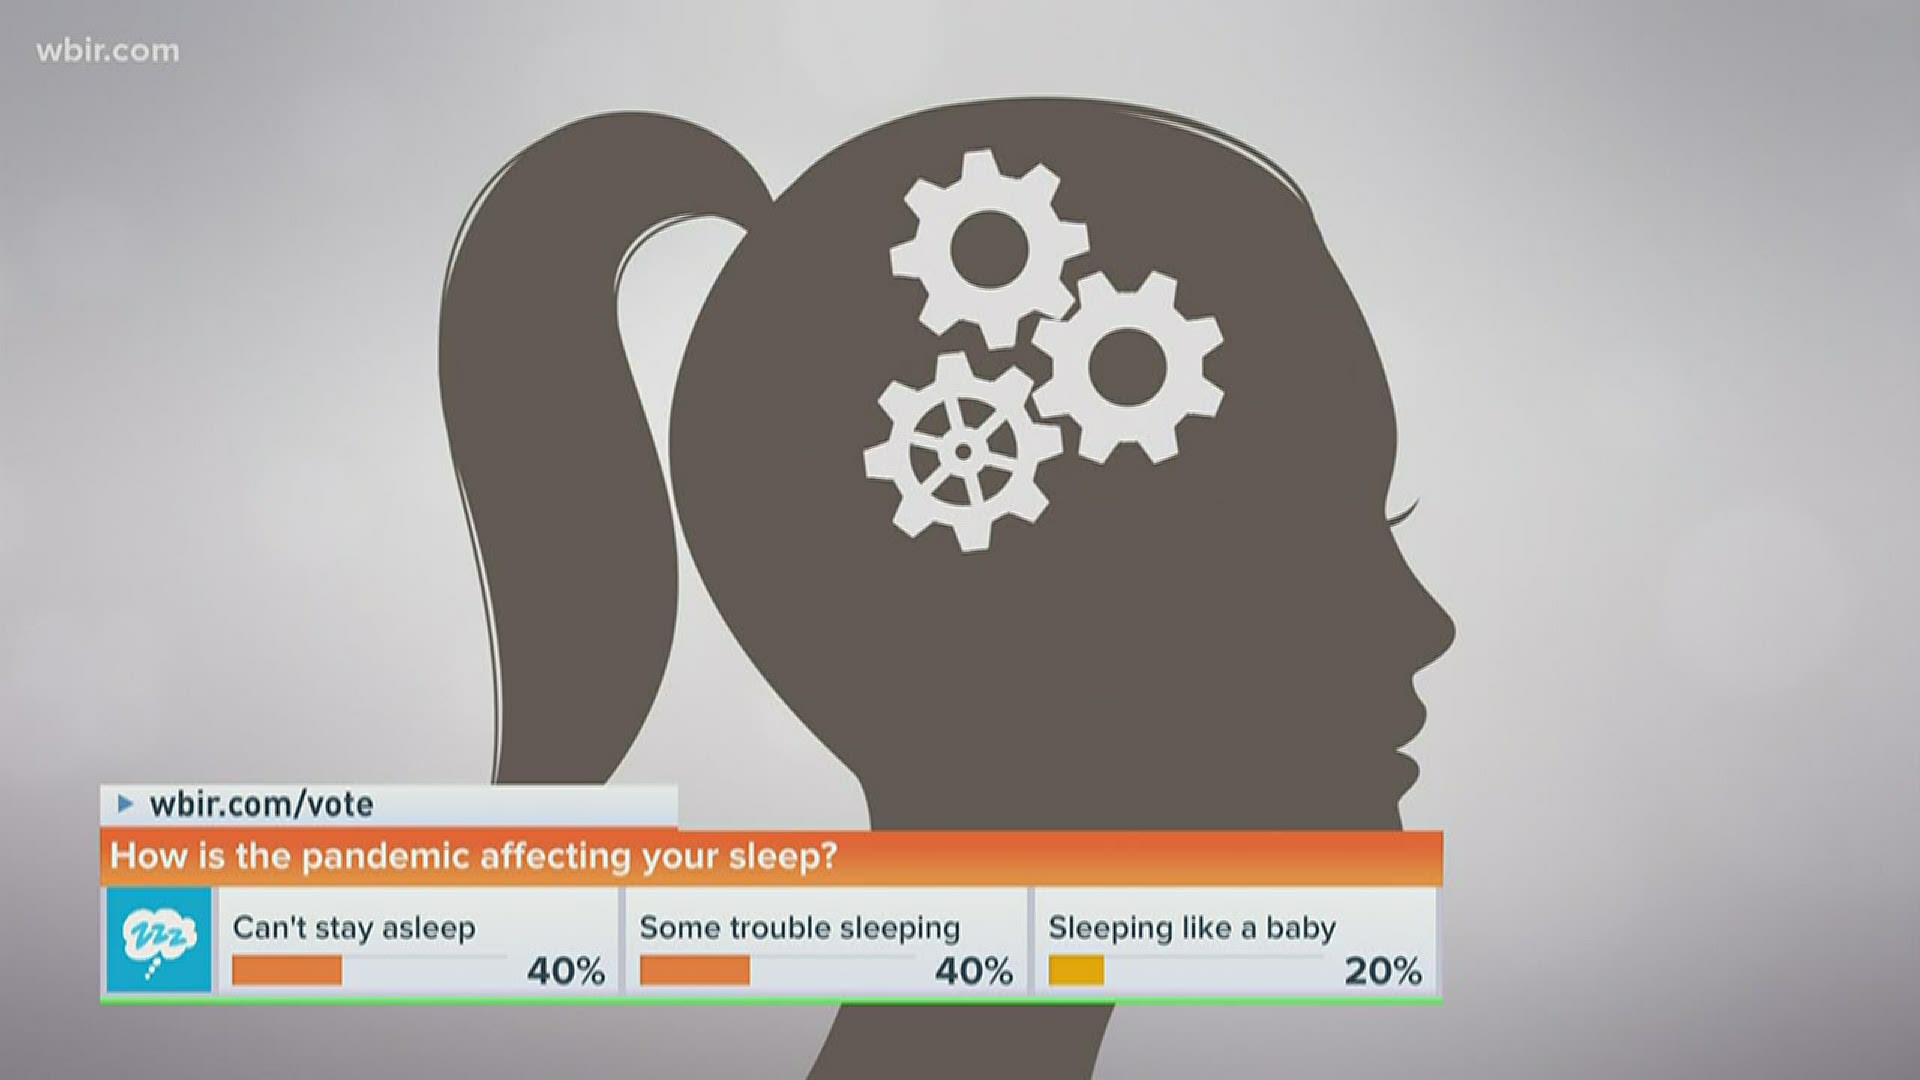 We want to know how the pandemic is affecting your sleep.